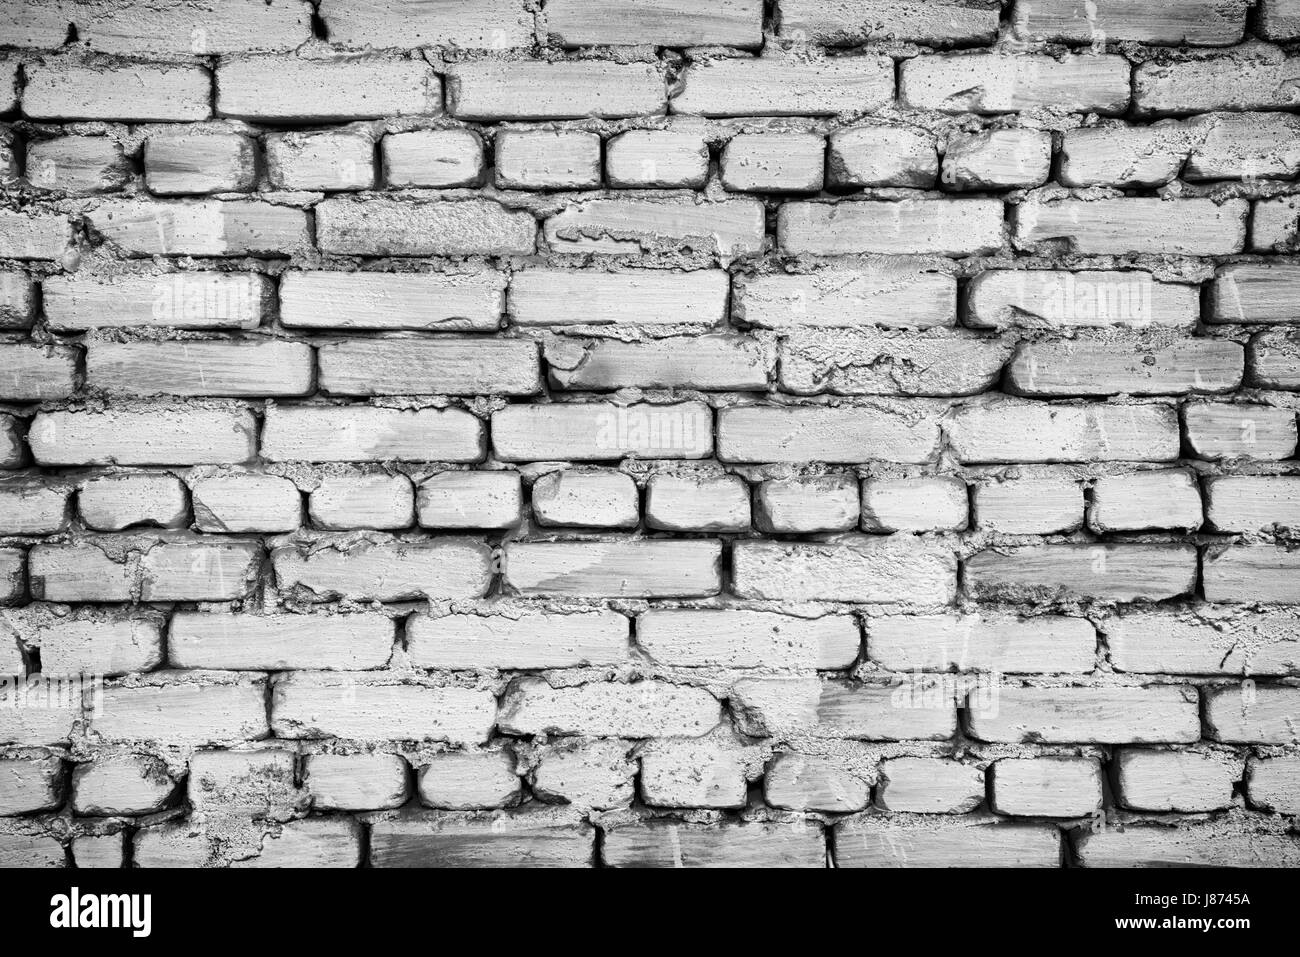 Fragment of old brick fence whitewashed by lime, relief surface and natural background, black and white Stock Photo